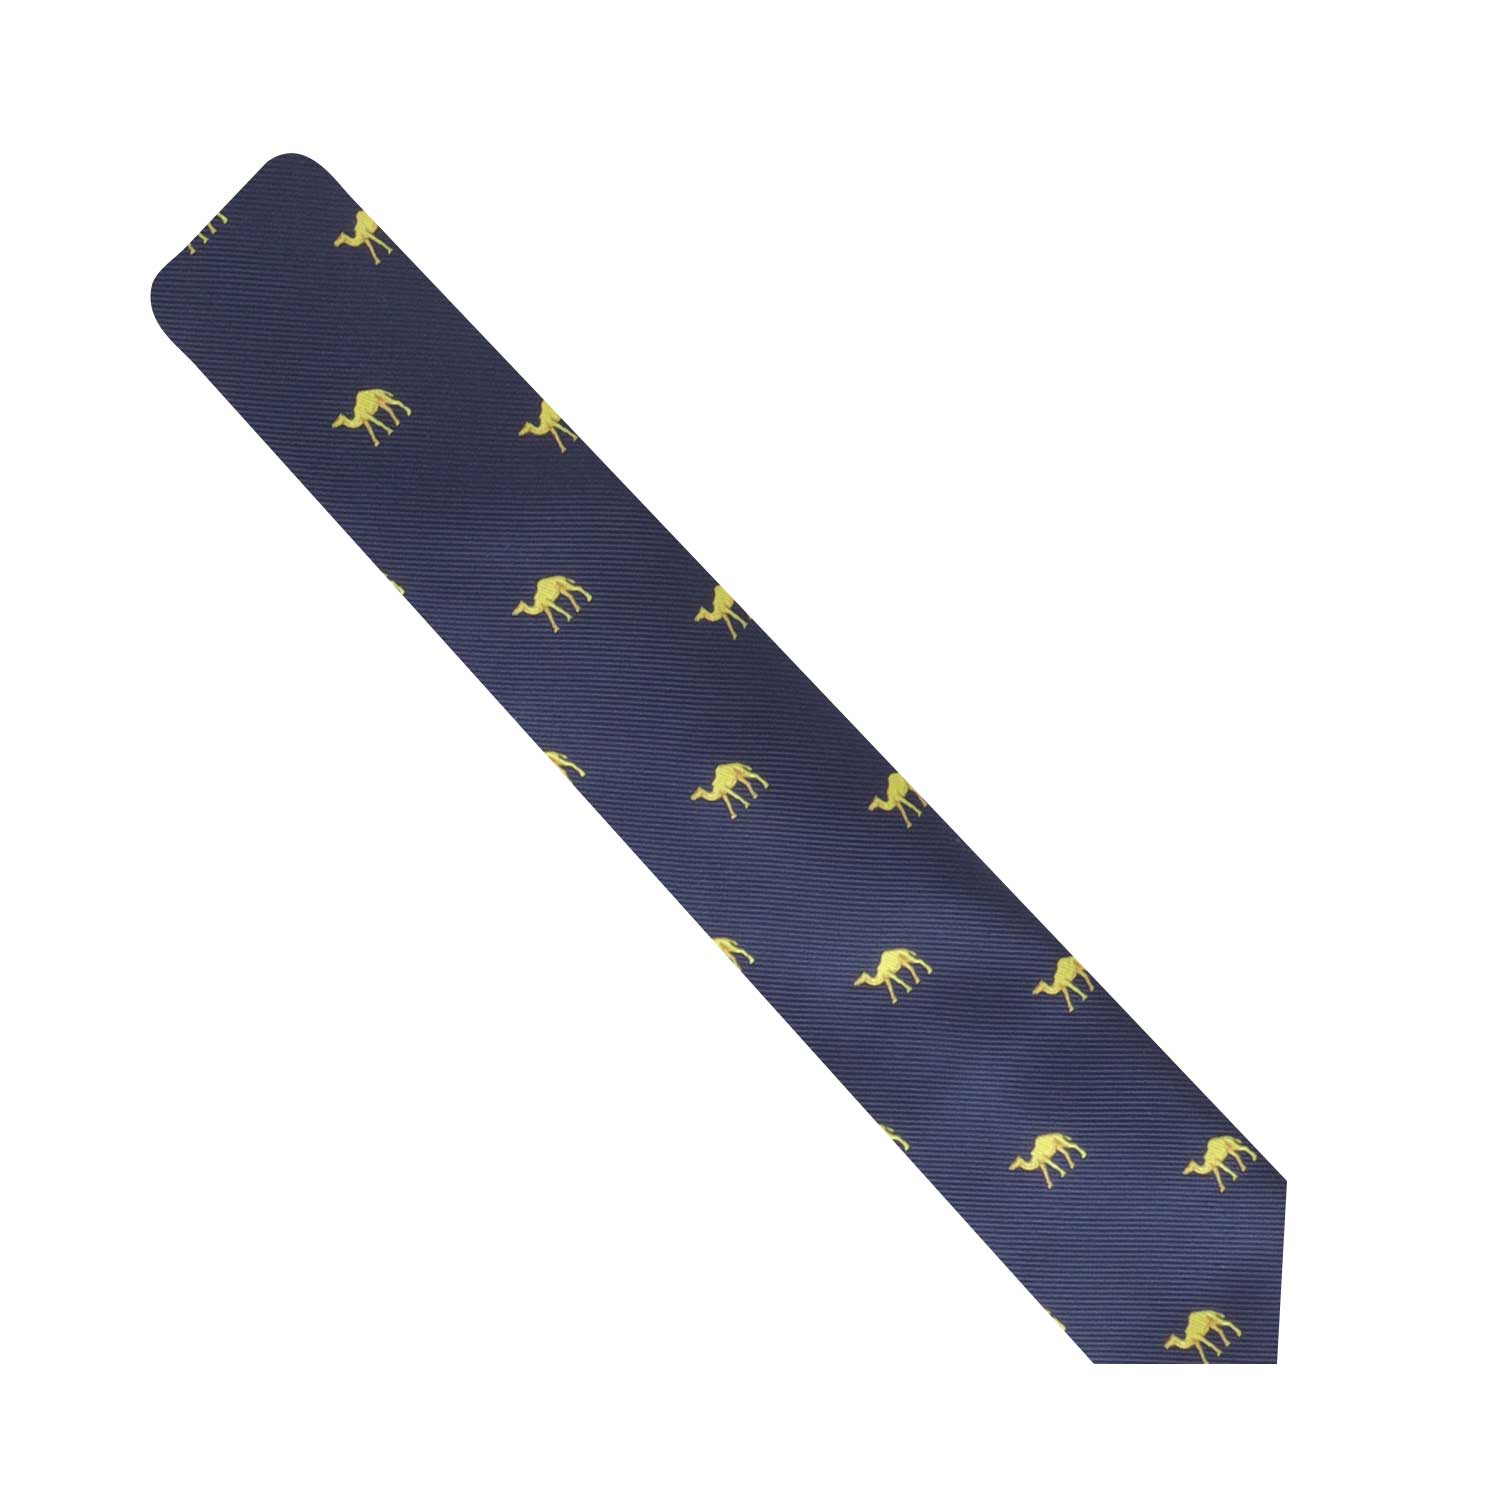 A Camel Skinny Tie with desert charm and horses on it.